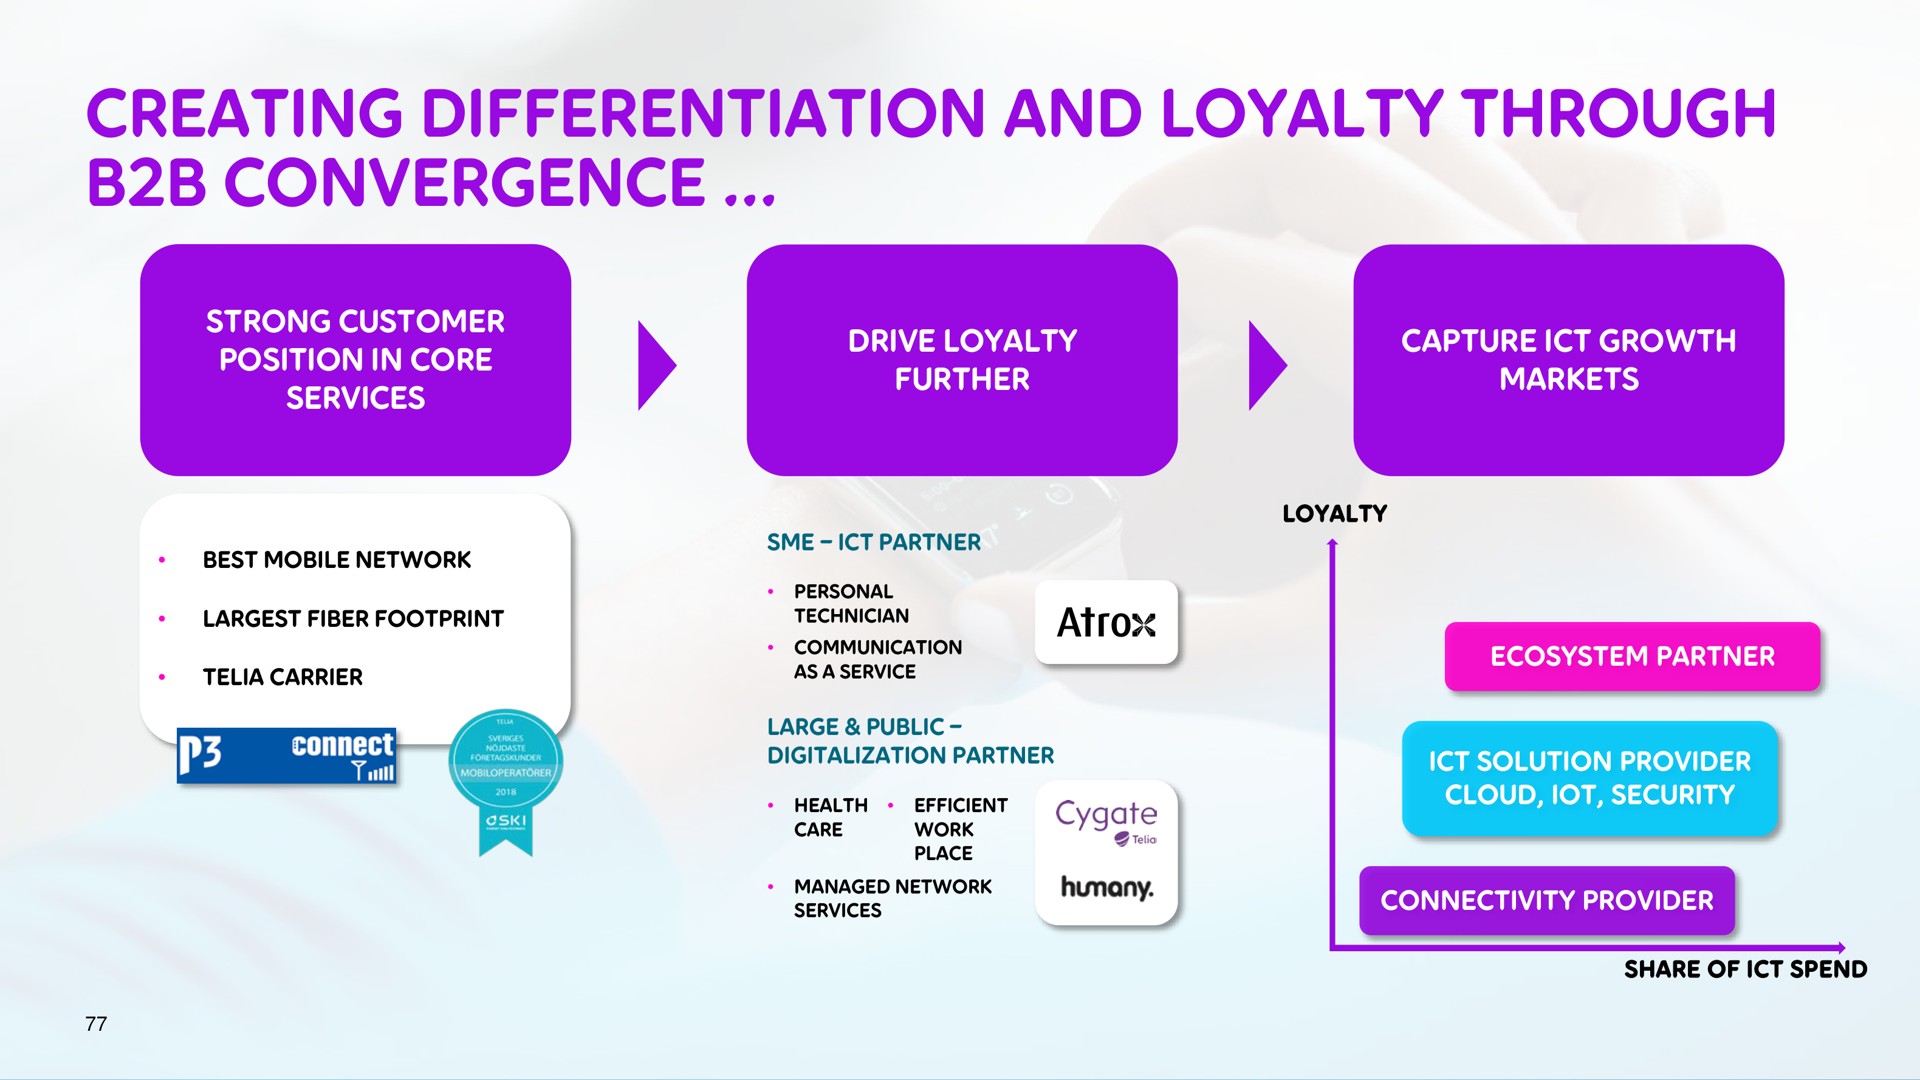 creating differentiation and loyalty through convergence | Telia Company